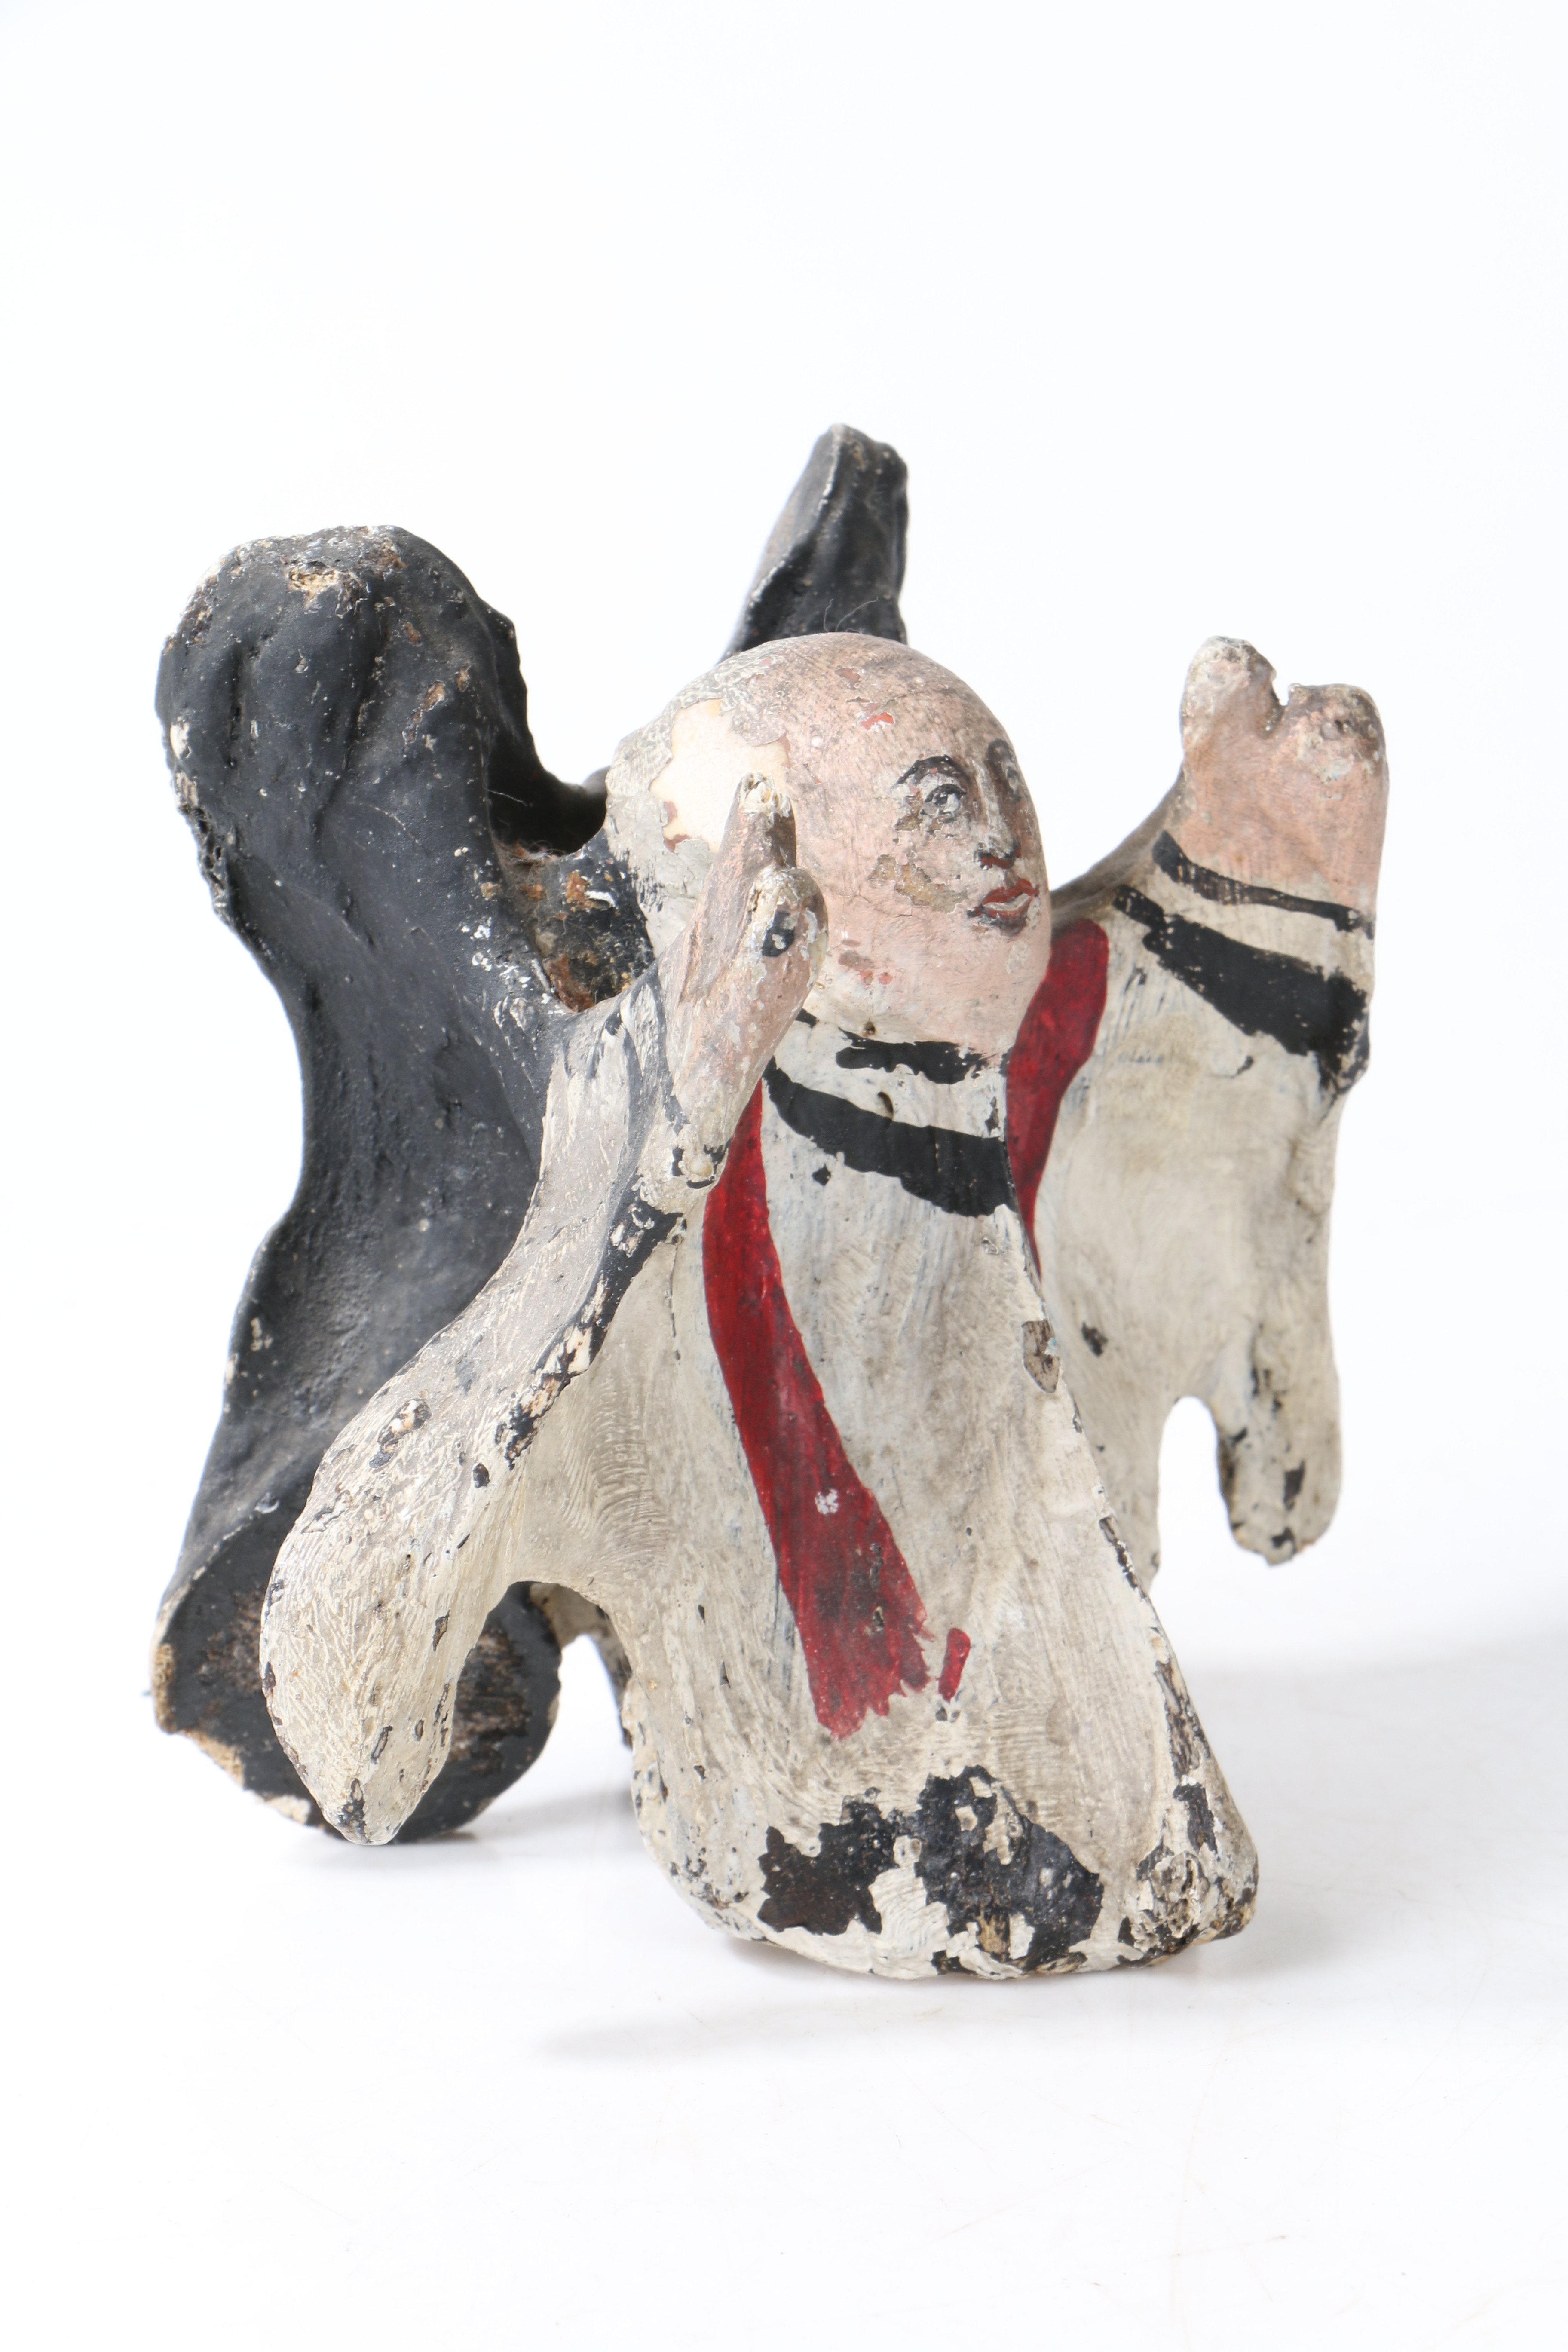 A UNUSUAL 19TH CENTURY PAINTED WHALE VERTEBRAE IN THE FORM OF JOHN WESLEY. - Image 6 of 7